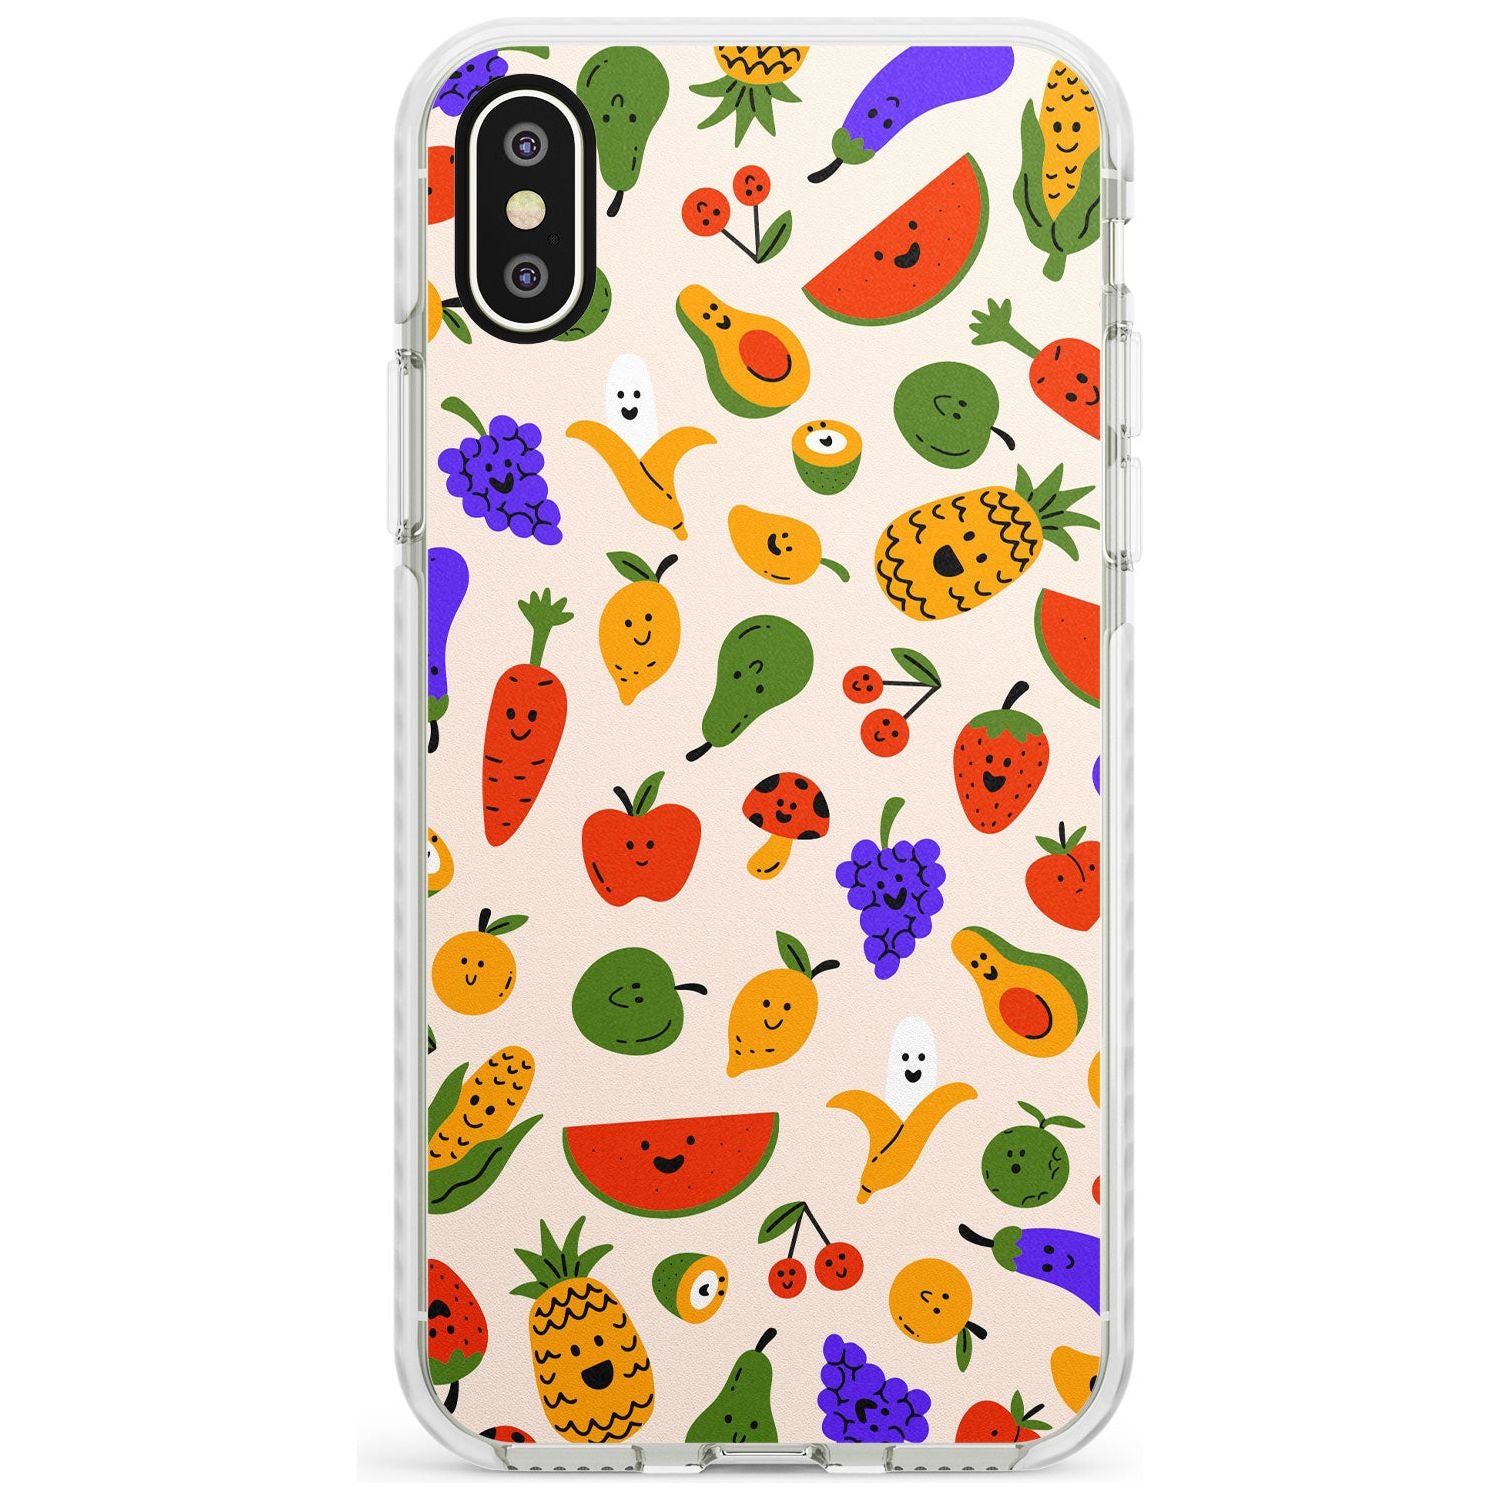 Mixed Kawaii Food Icons - Solid iPhone Case Impact Phone Case Warehouse X XS Max XR